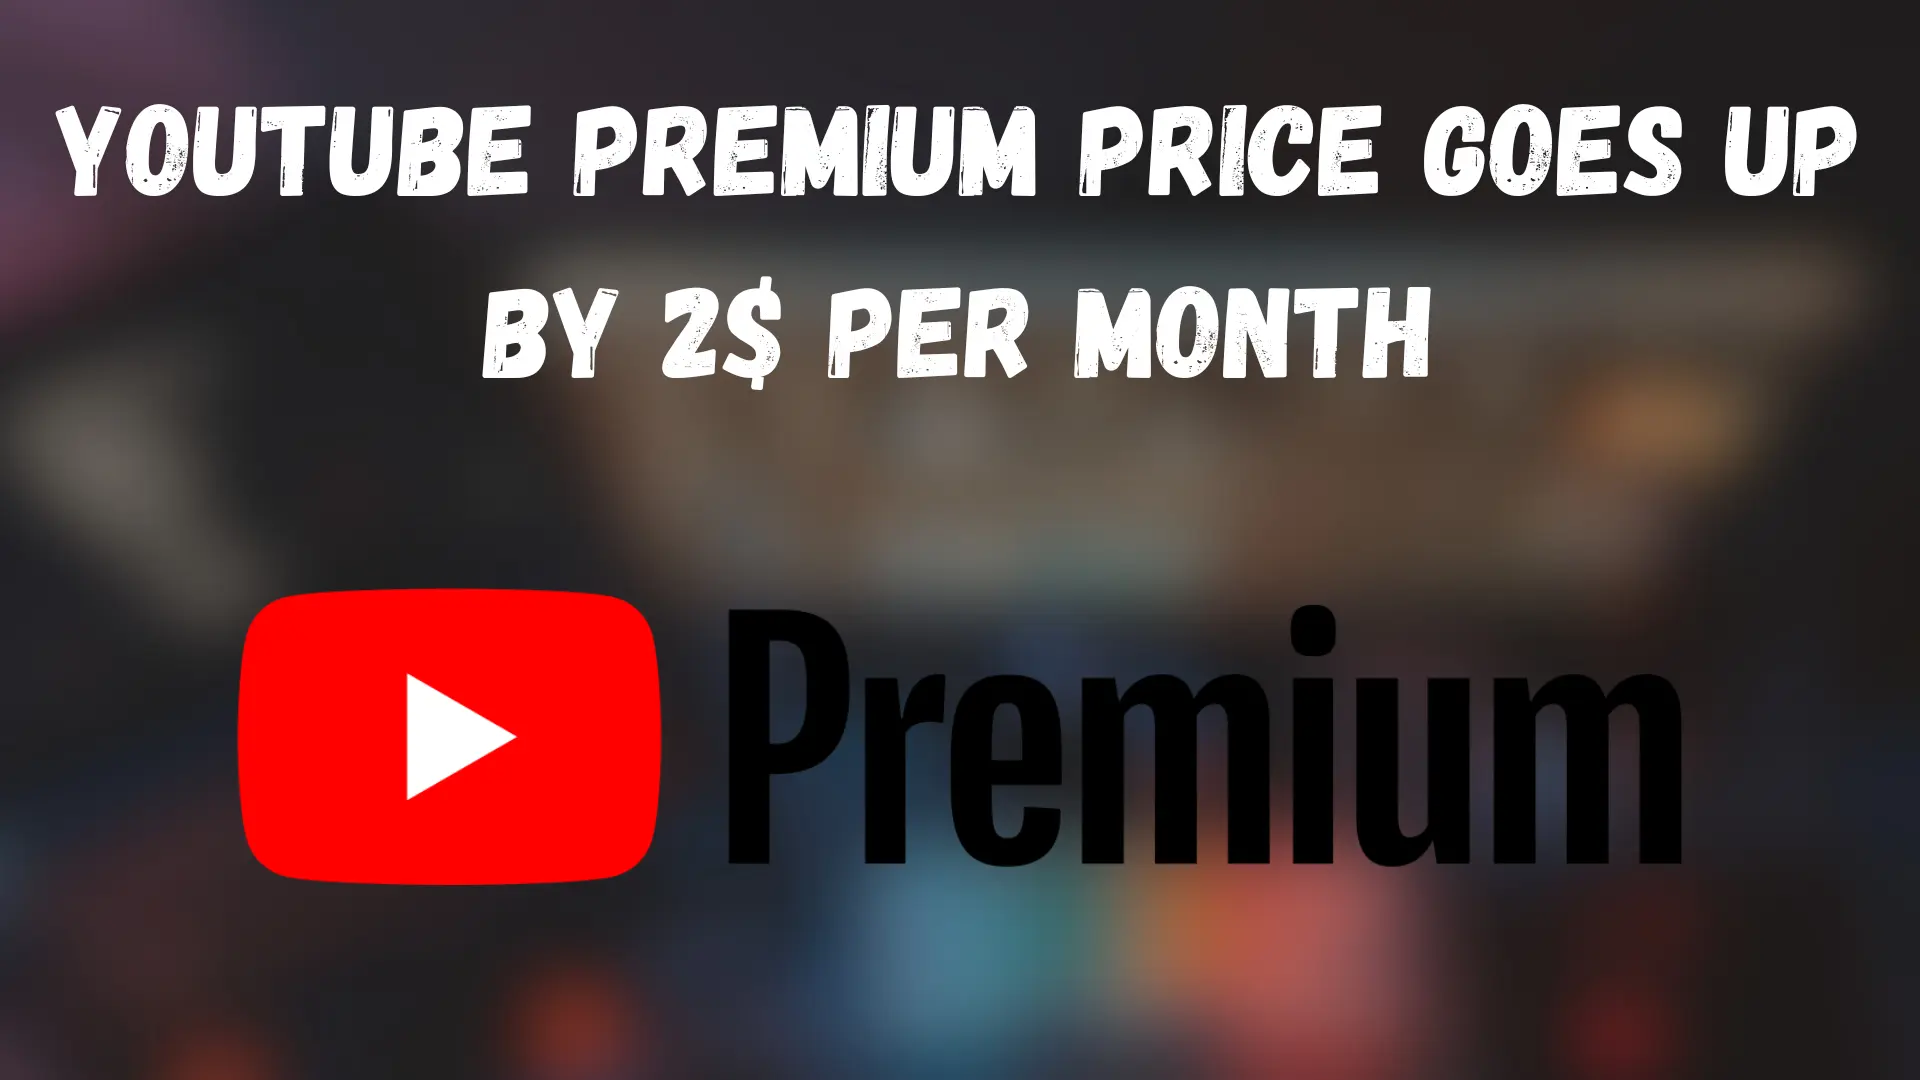 youtube premium price goes up by $2 per month